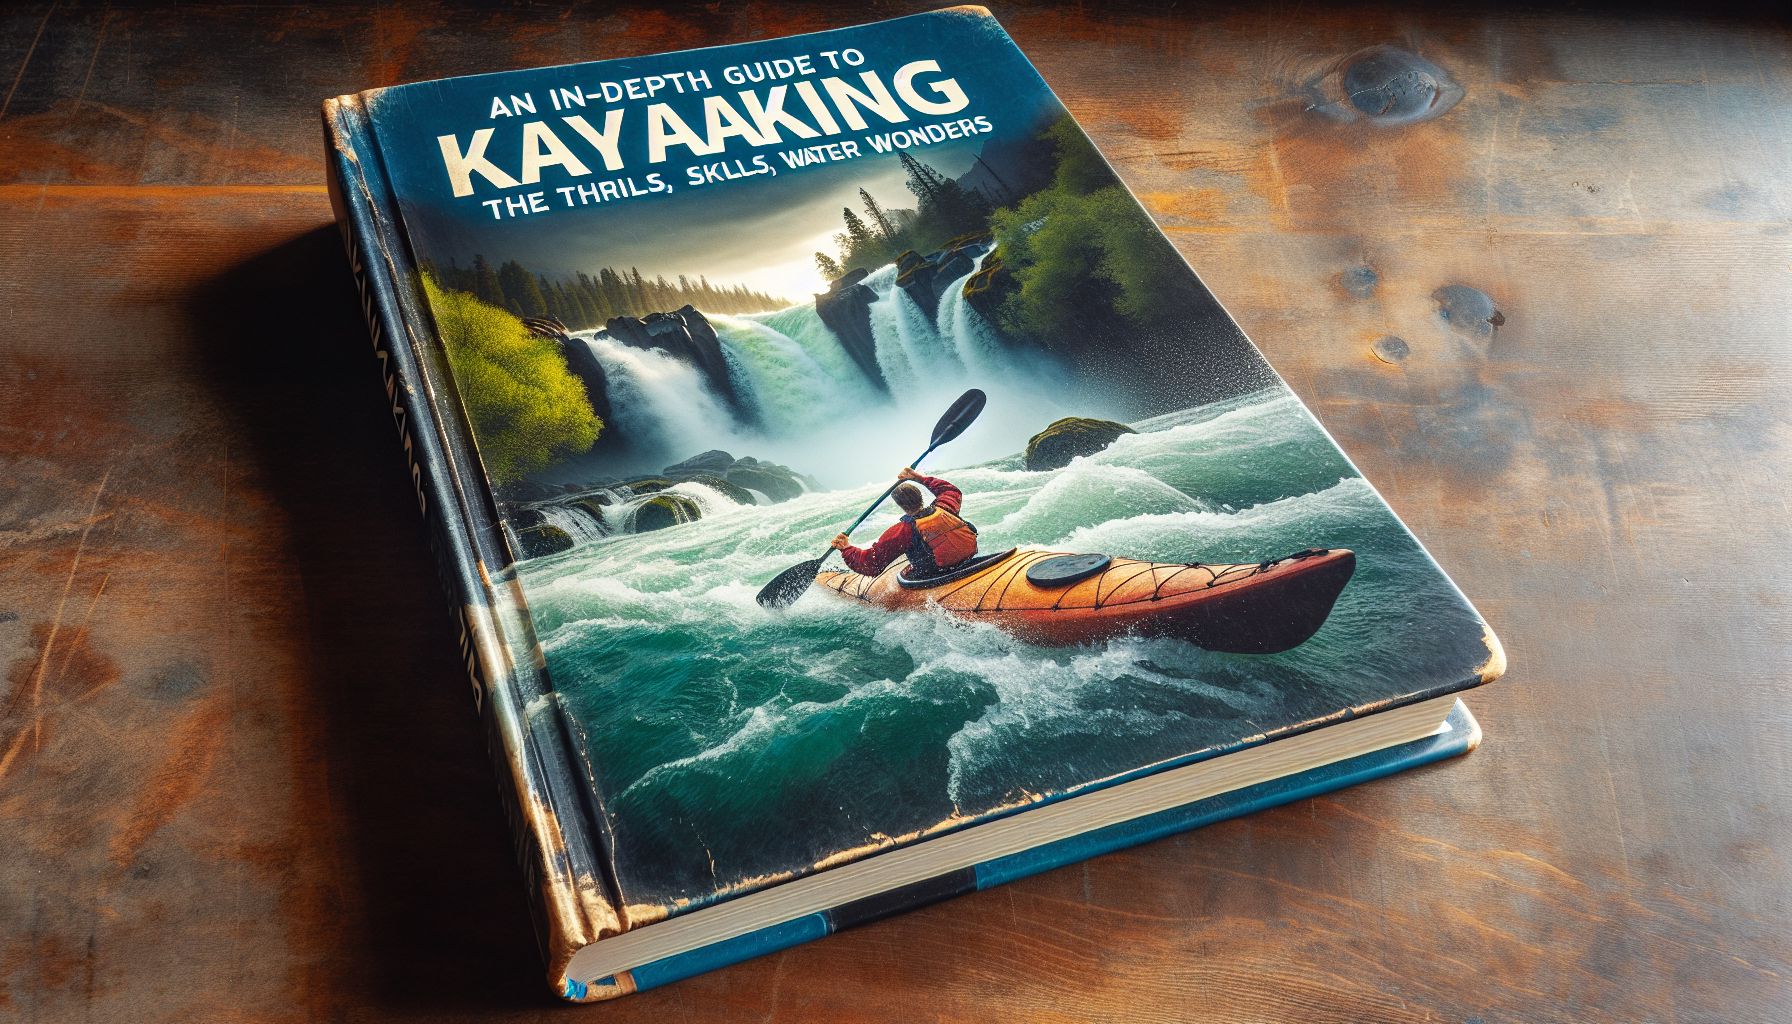 An In-Depth Guide to Kayaking: The Thrills, Skills, and Water Wonders